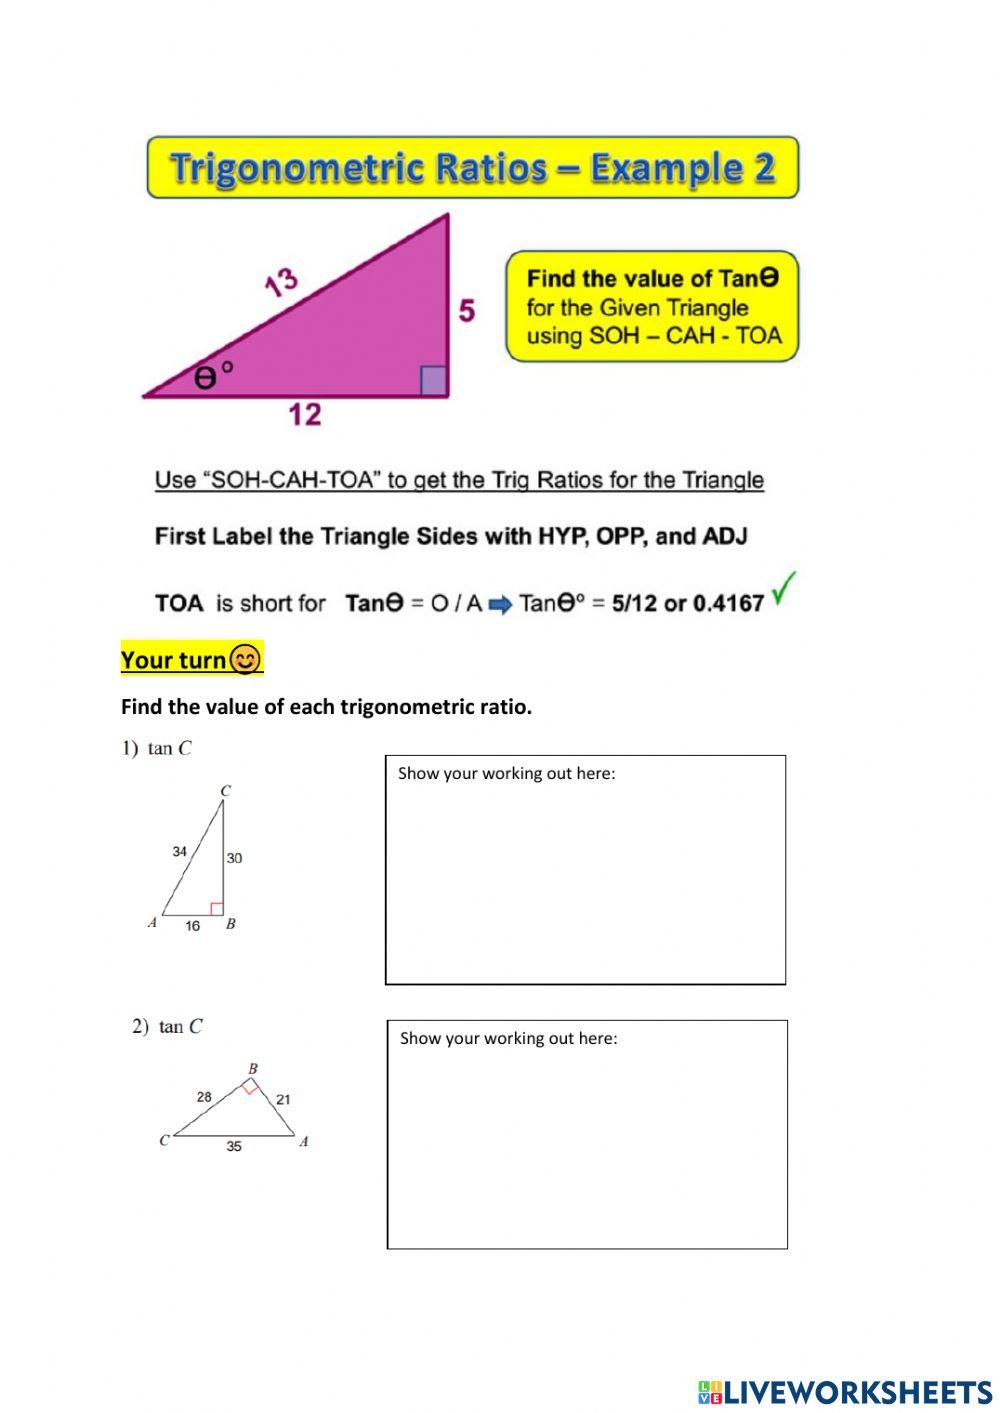 Trigonometric Ratios-Notes and Practise Questions